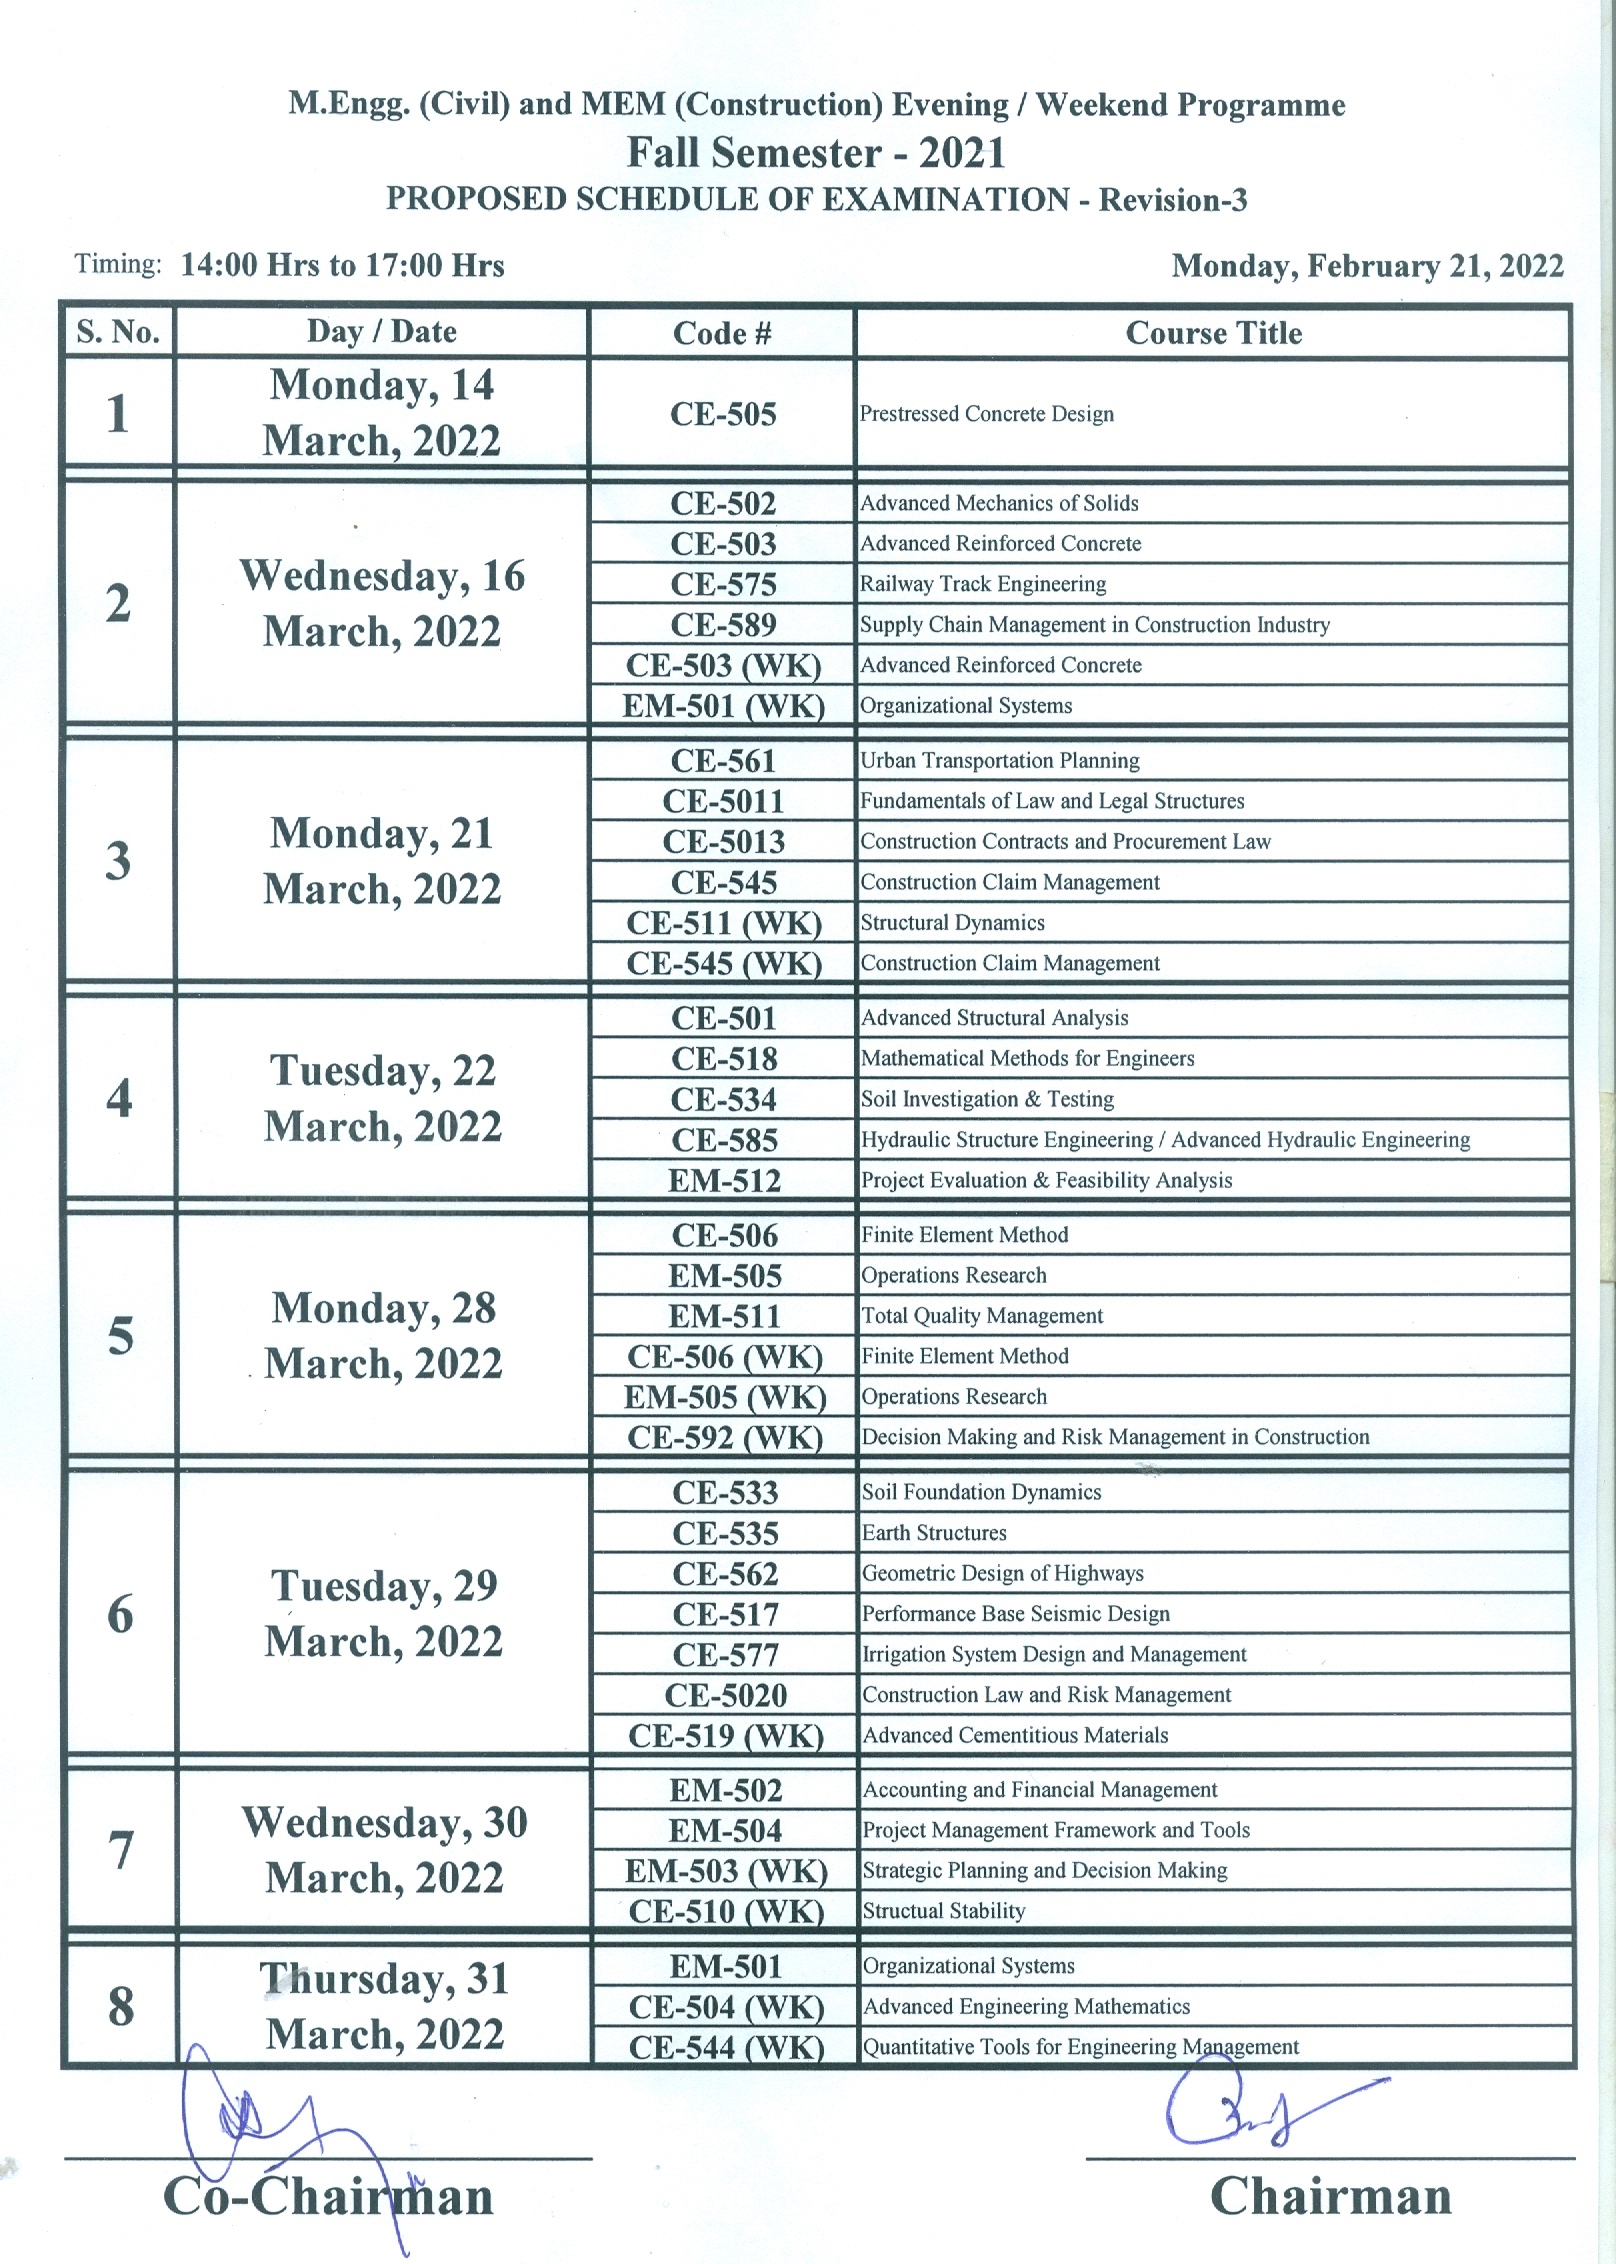 Revised Schedule of Examination for Fall Semester 2021, M.Engg.(Civil